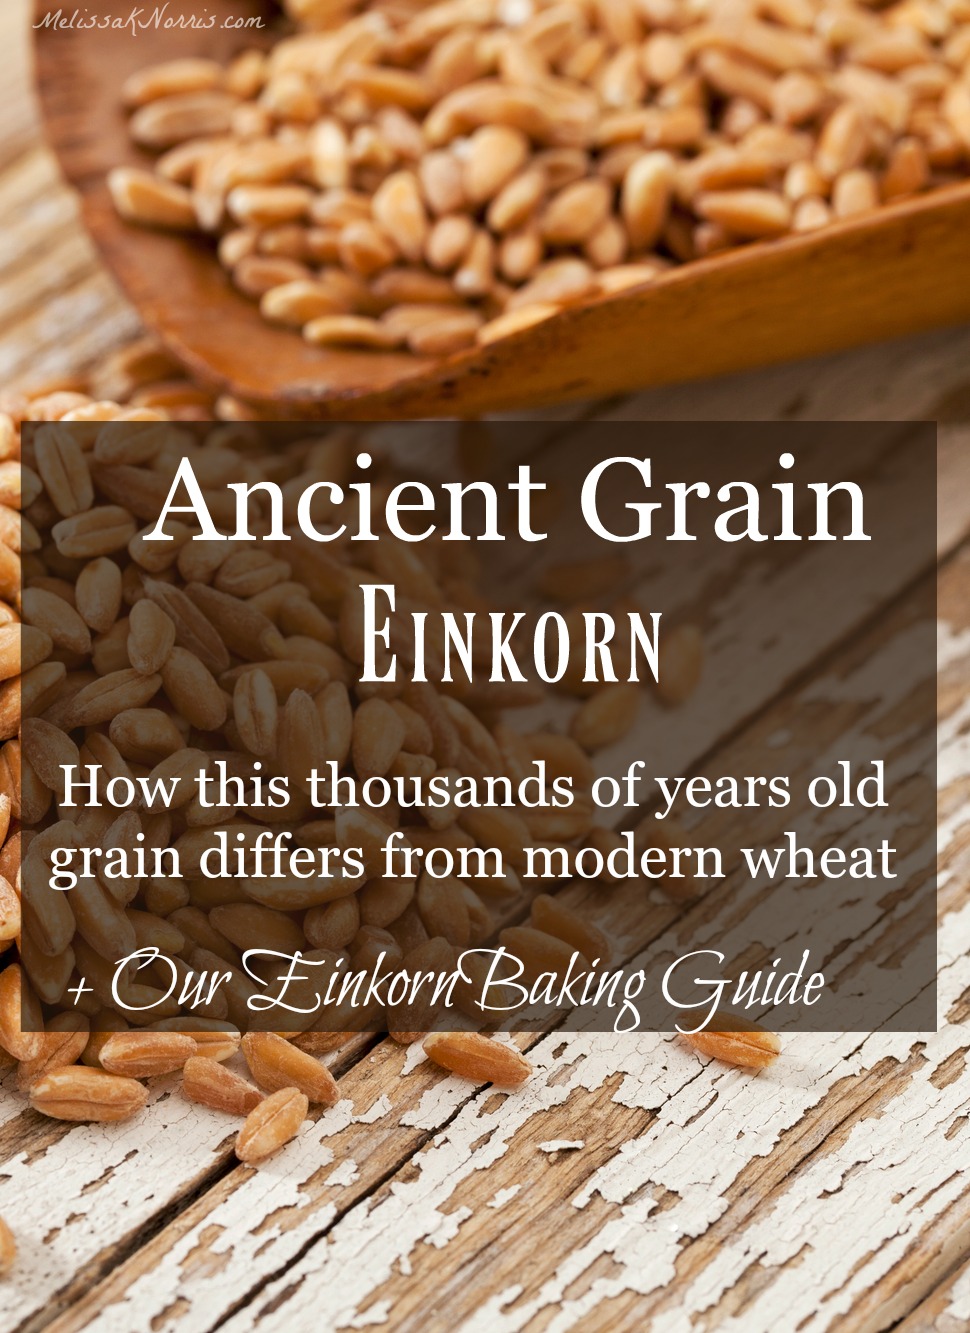 Image of einkorn grain on an old table with text overlay, "Ancient Grain Einkorn".